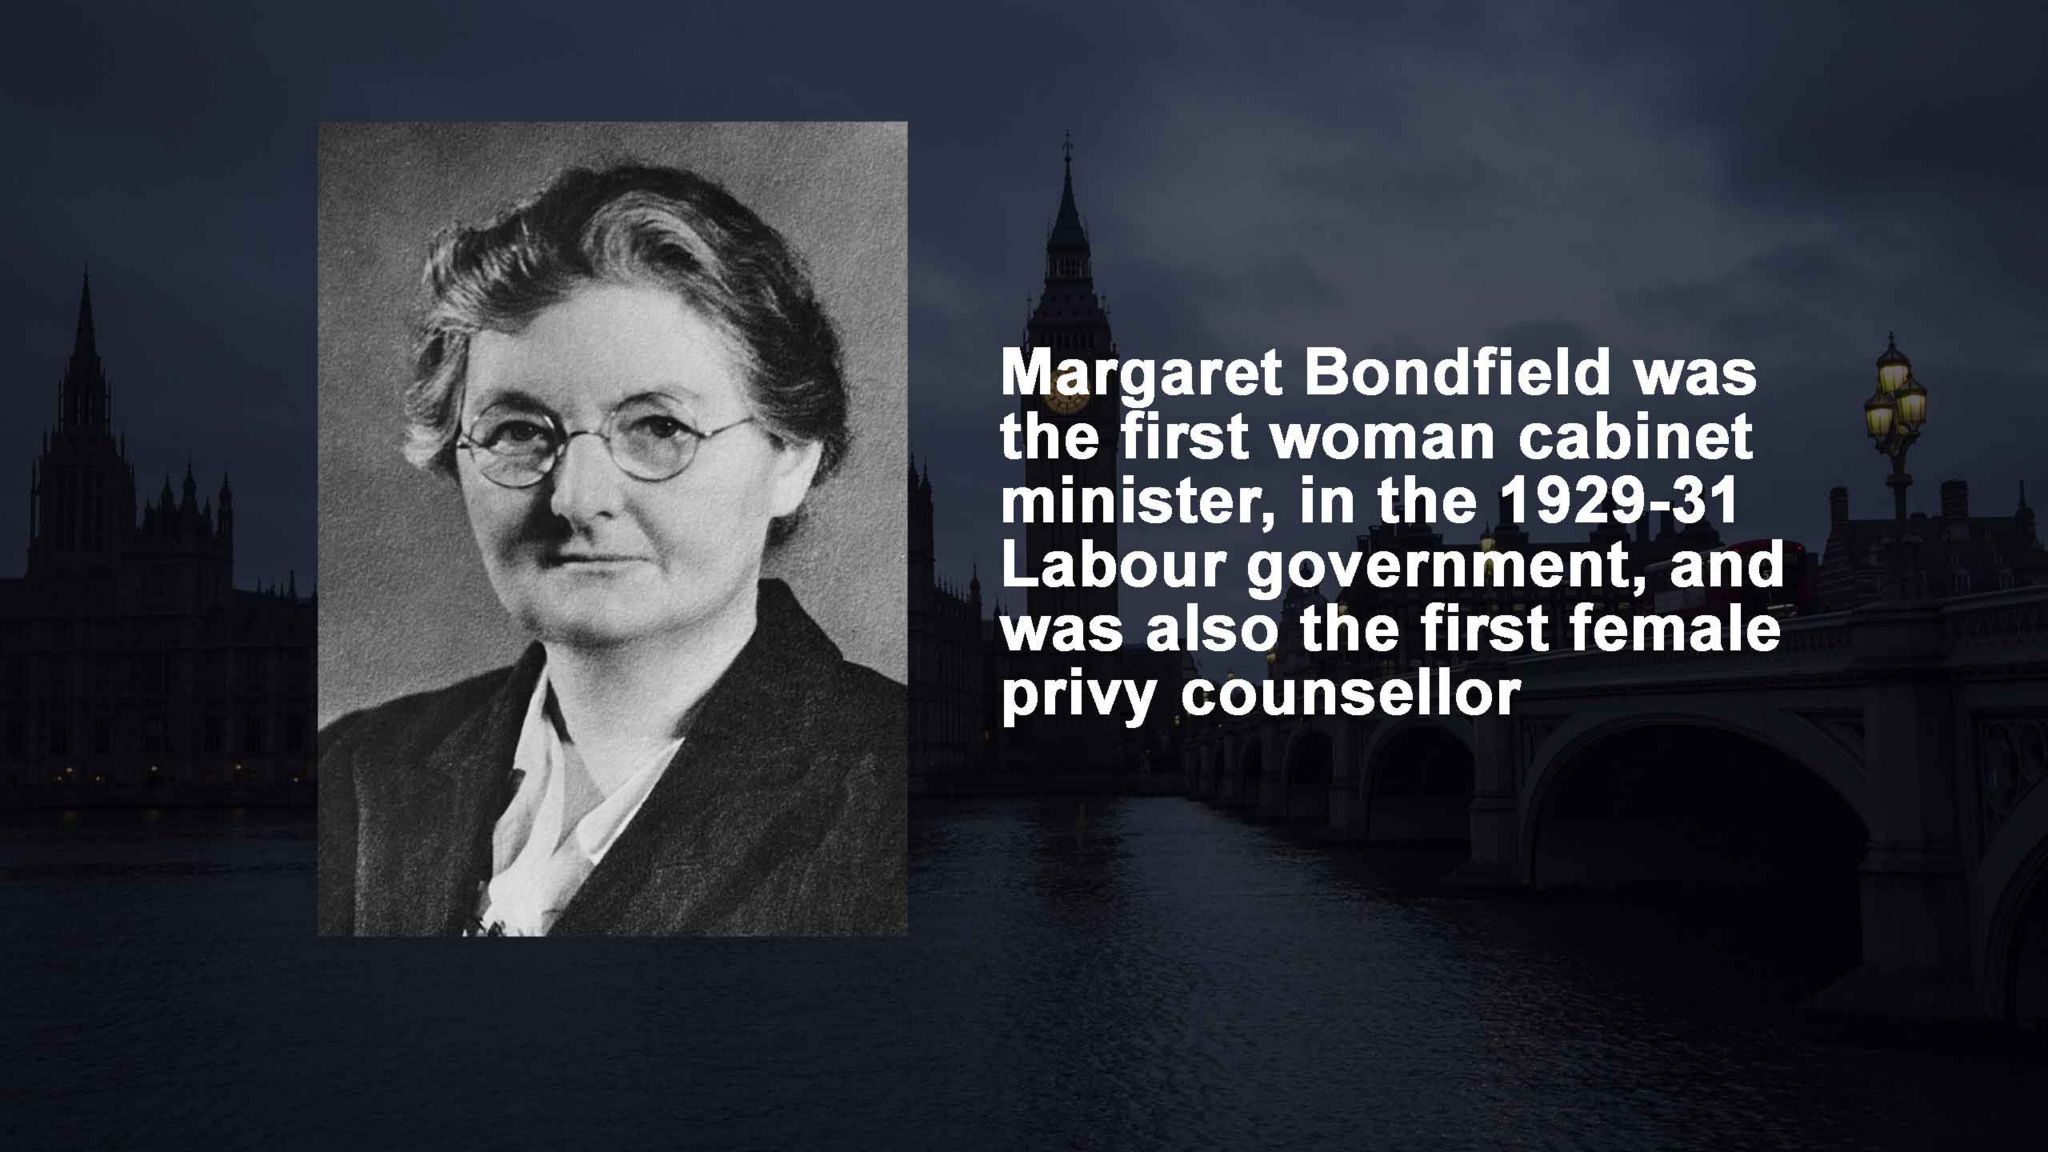 Reads: Margaret Bondfield was the first woman cabinet minister, in the 1929-31 Labour government, and was also the first female privy counsellor